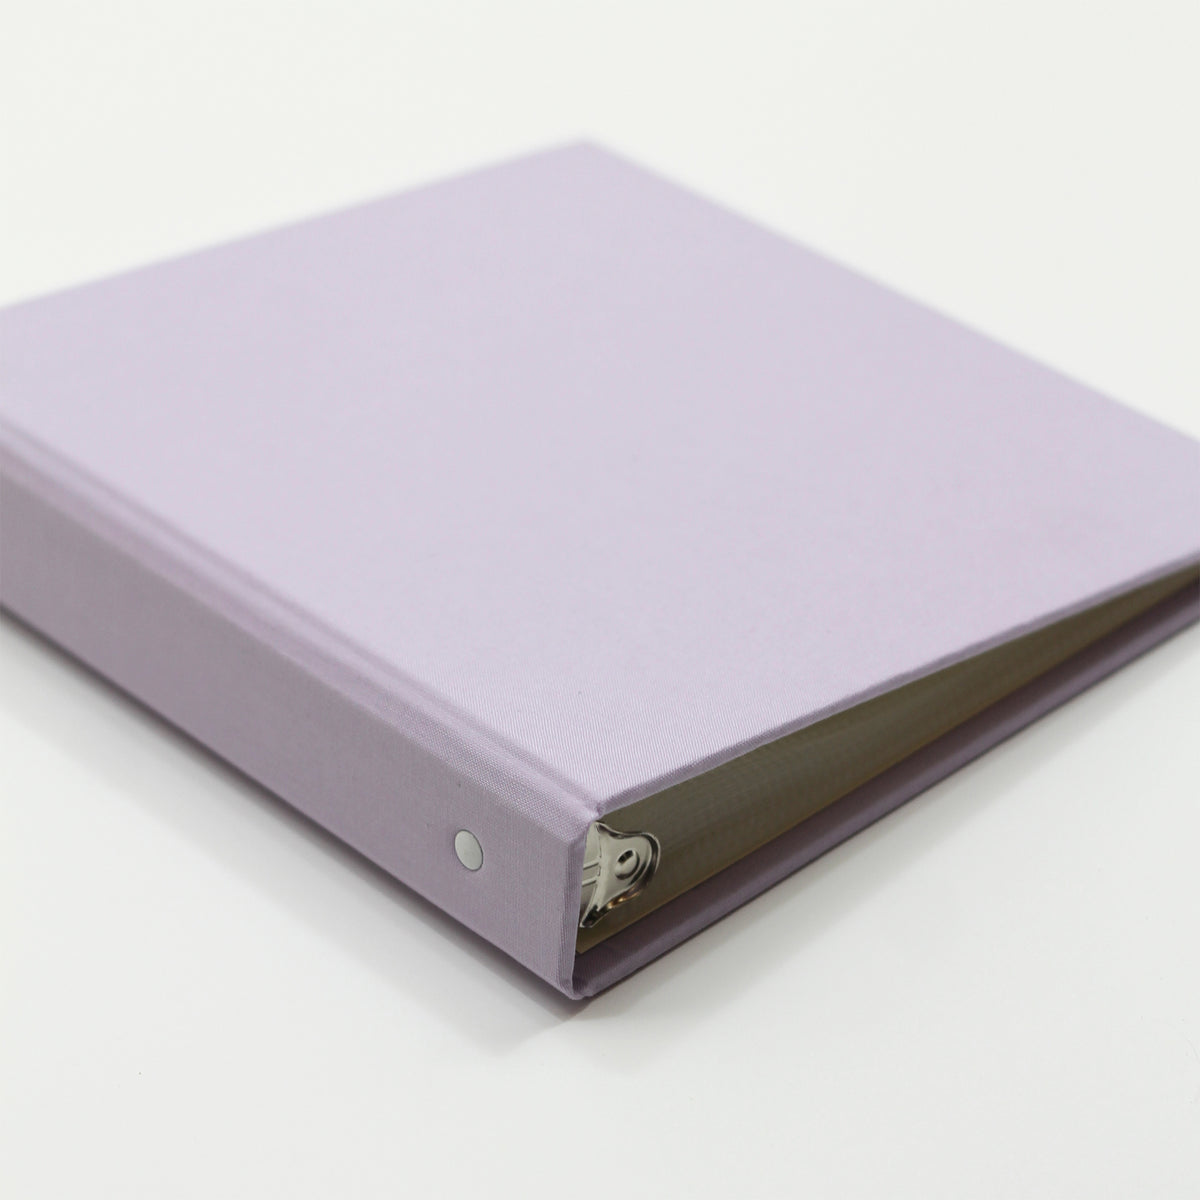 Medium Photo Binder | for 4 x 6 photos | with Lavender Cotton Cover